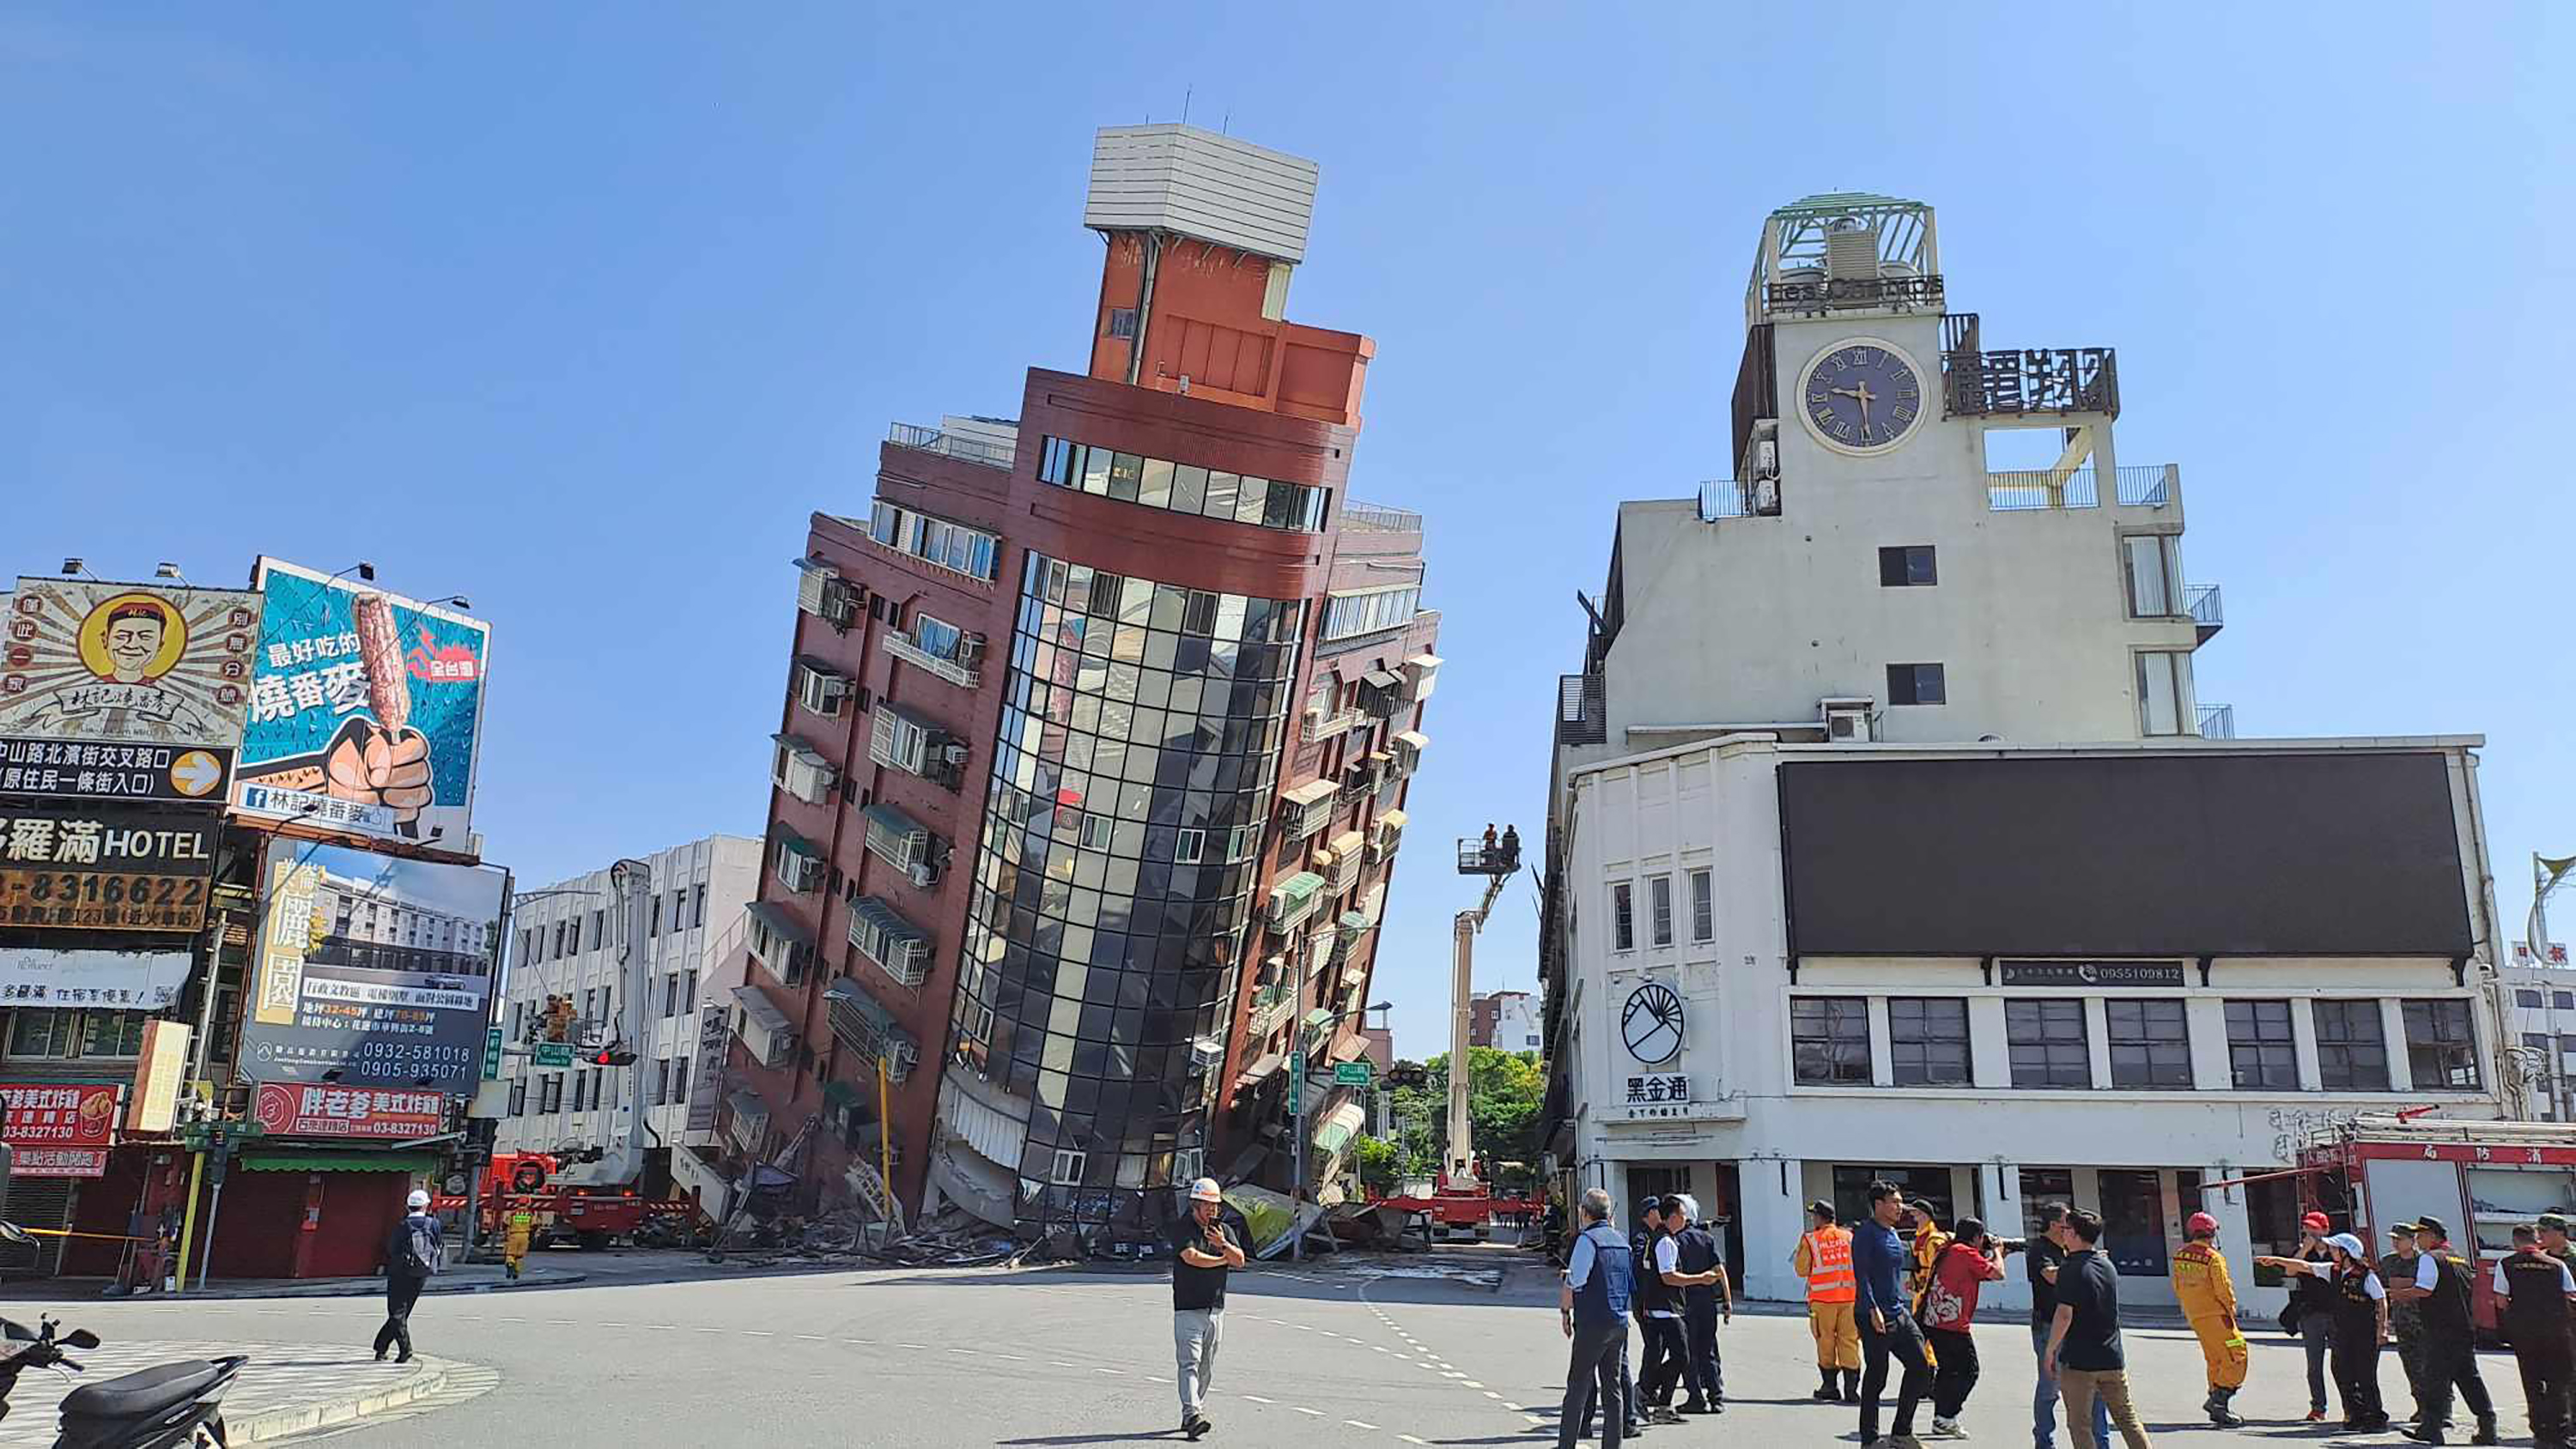 A building in Hualien County, Taiwan, partially collapsed after a powerful earthquake rocked the island on April 3.